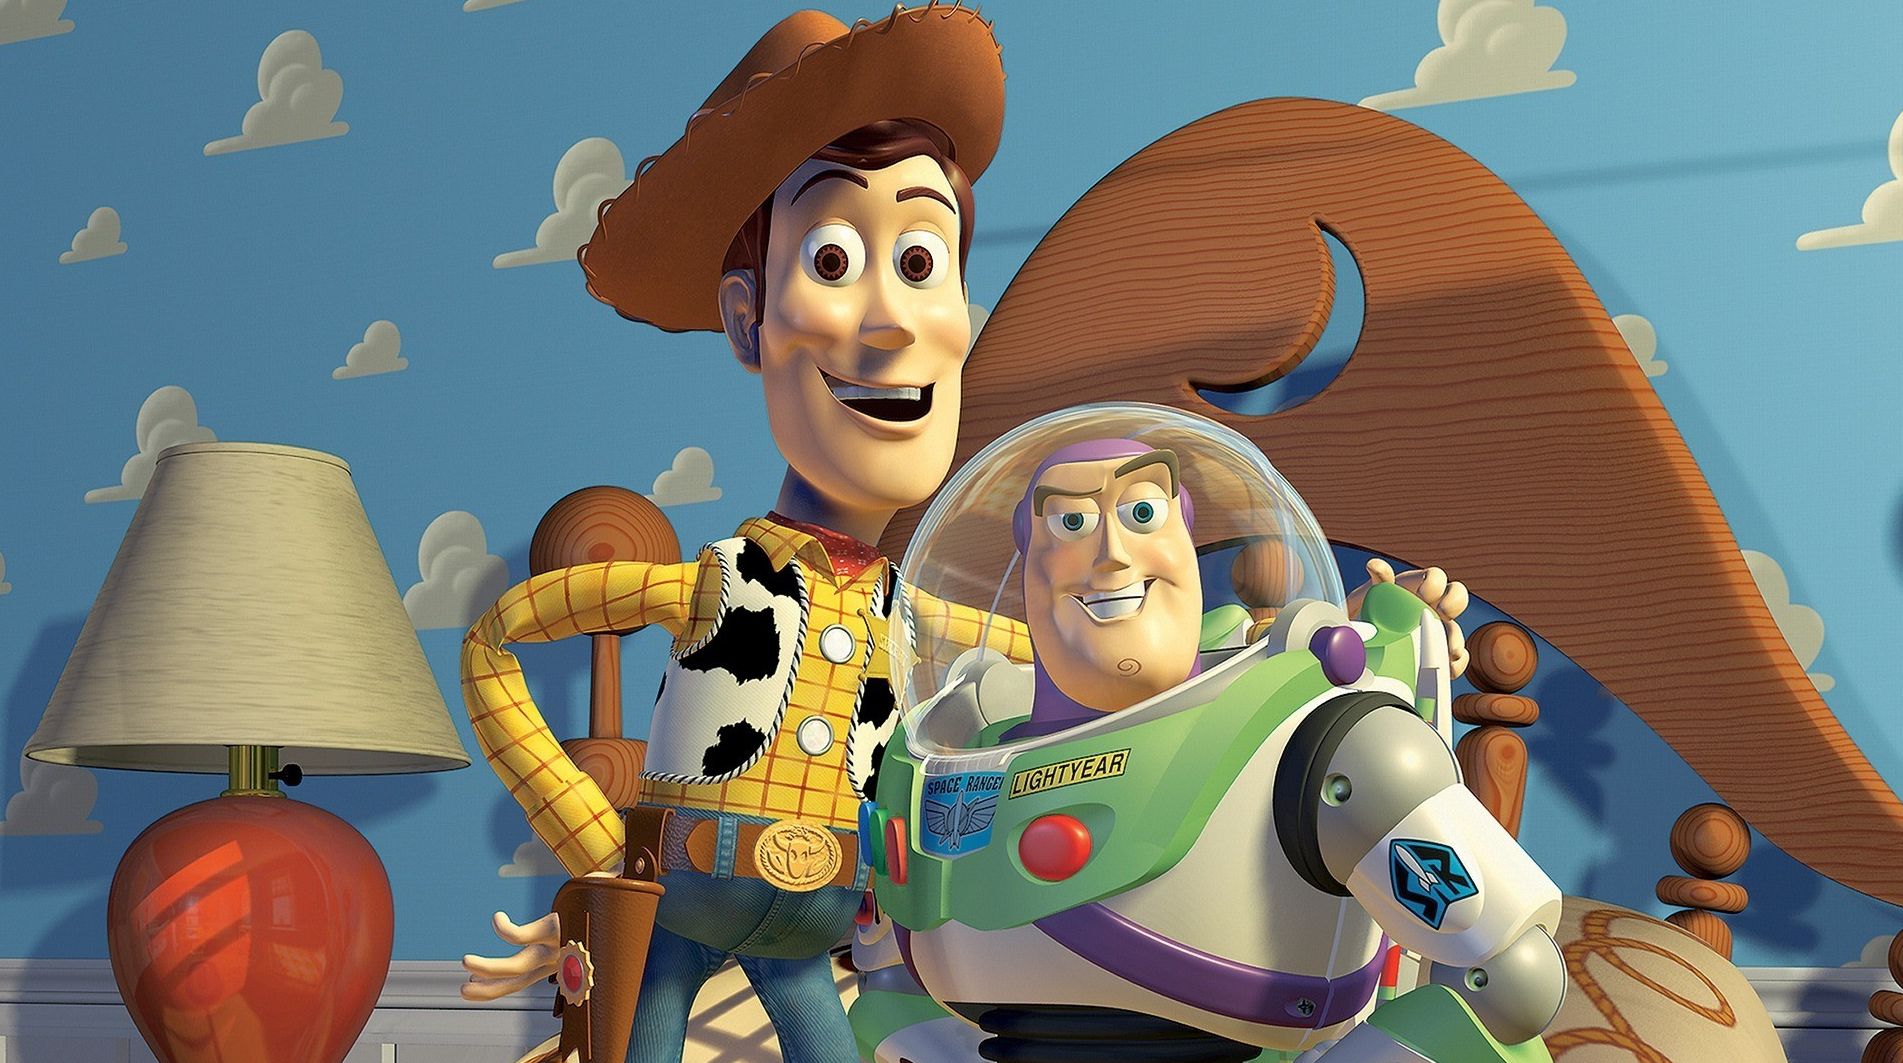 Toy Story to Celebrate 20th Anniversary this October